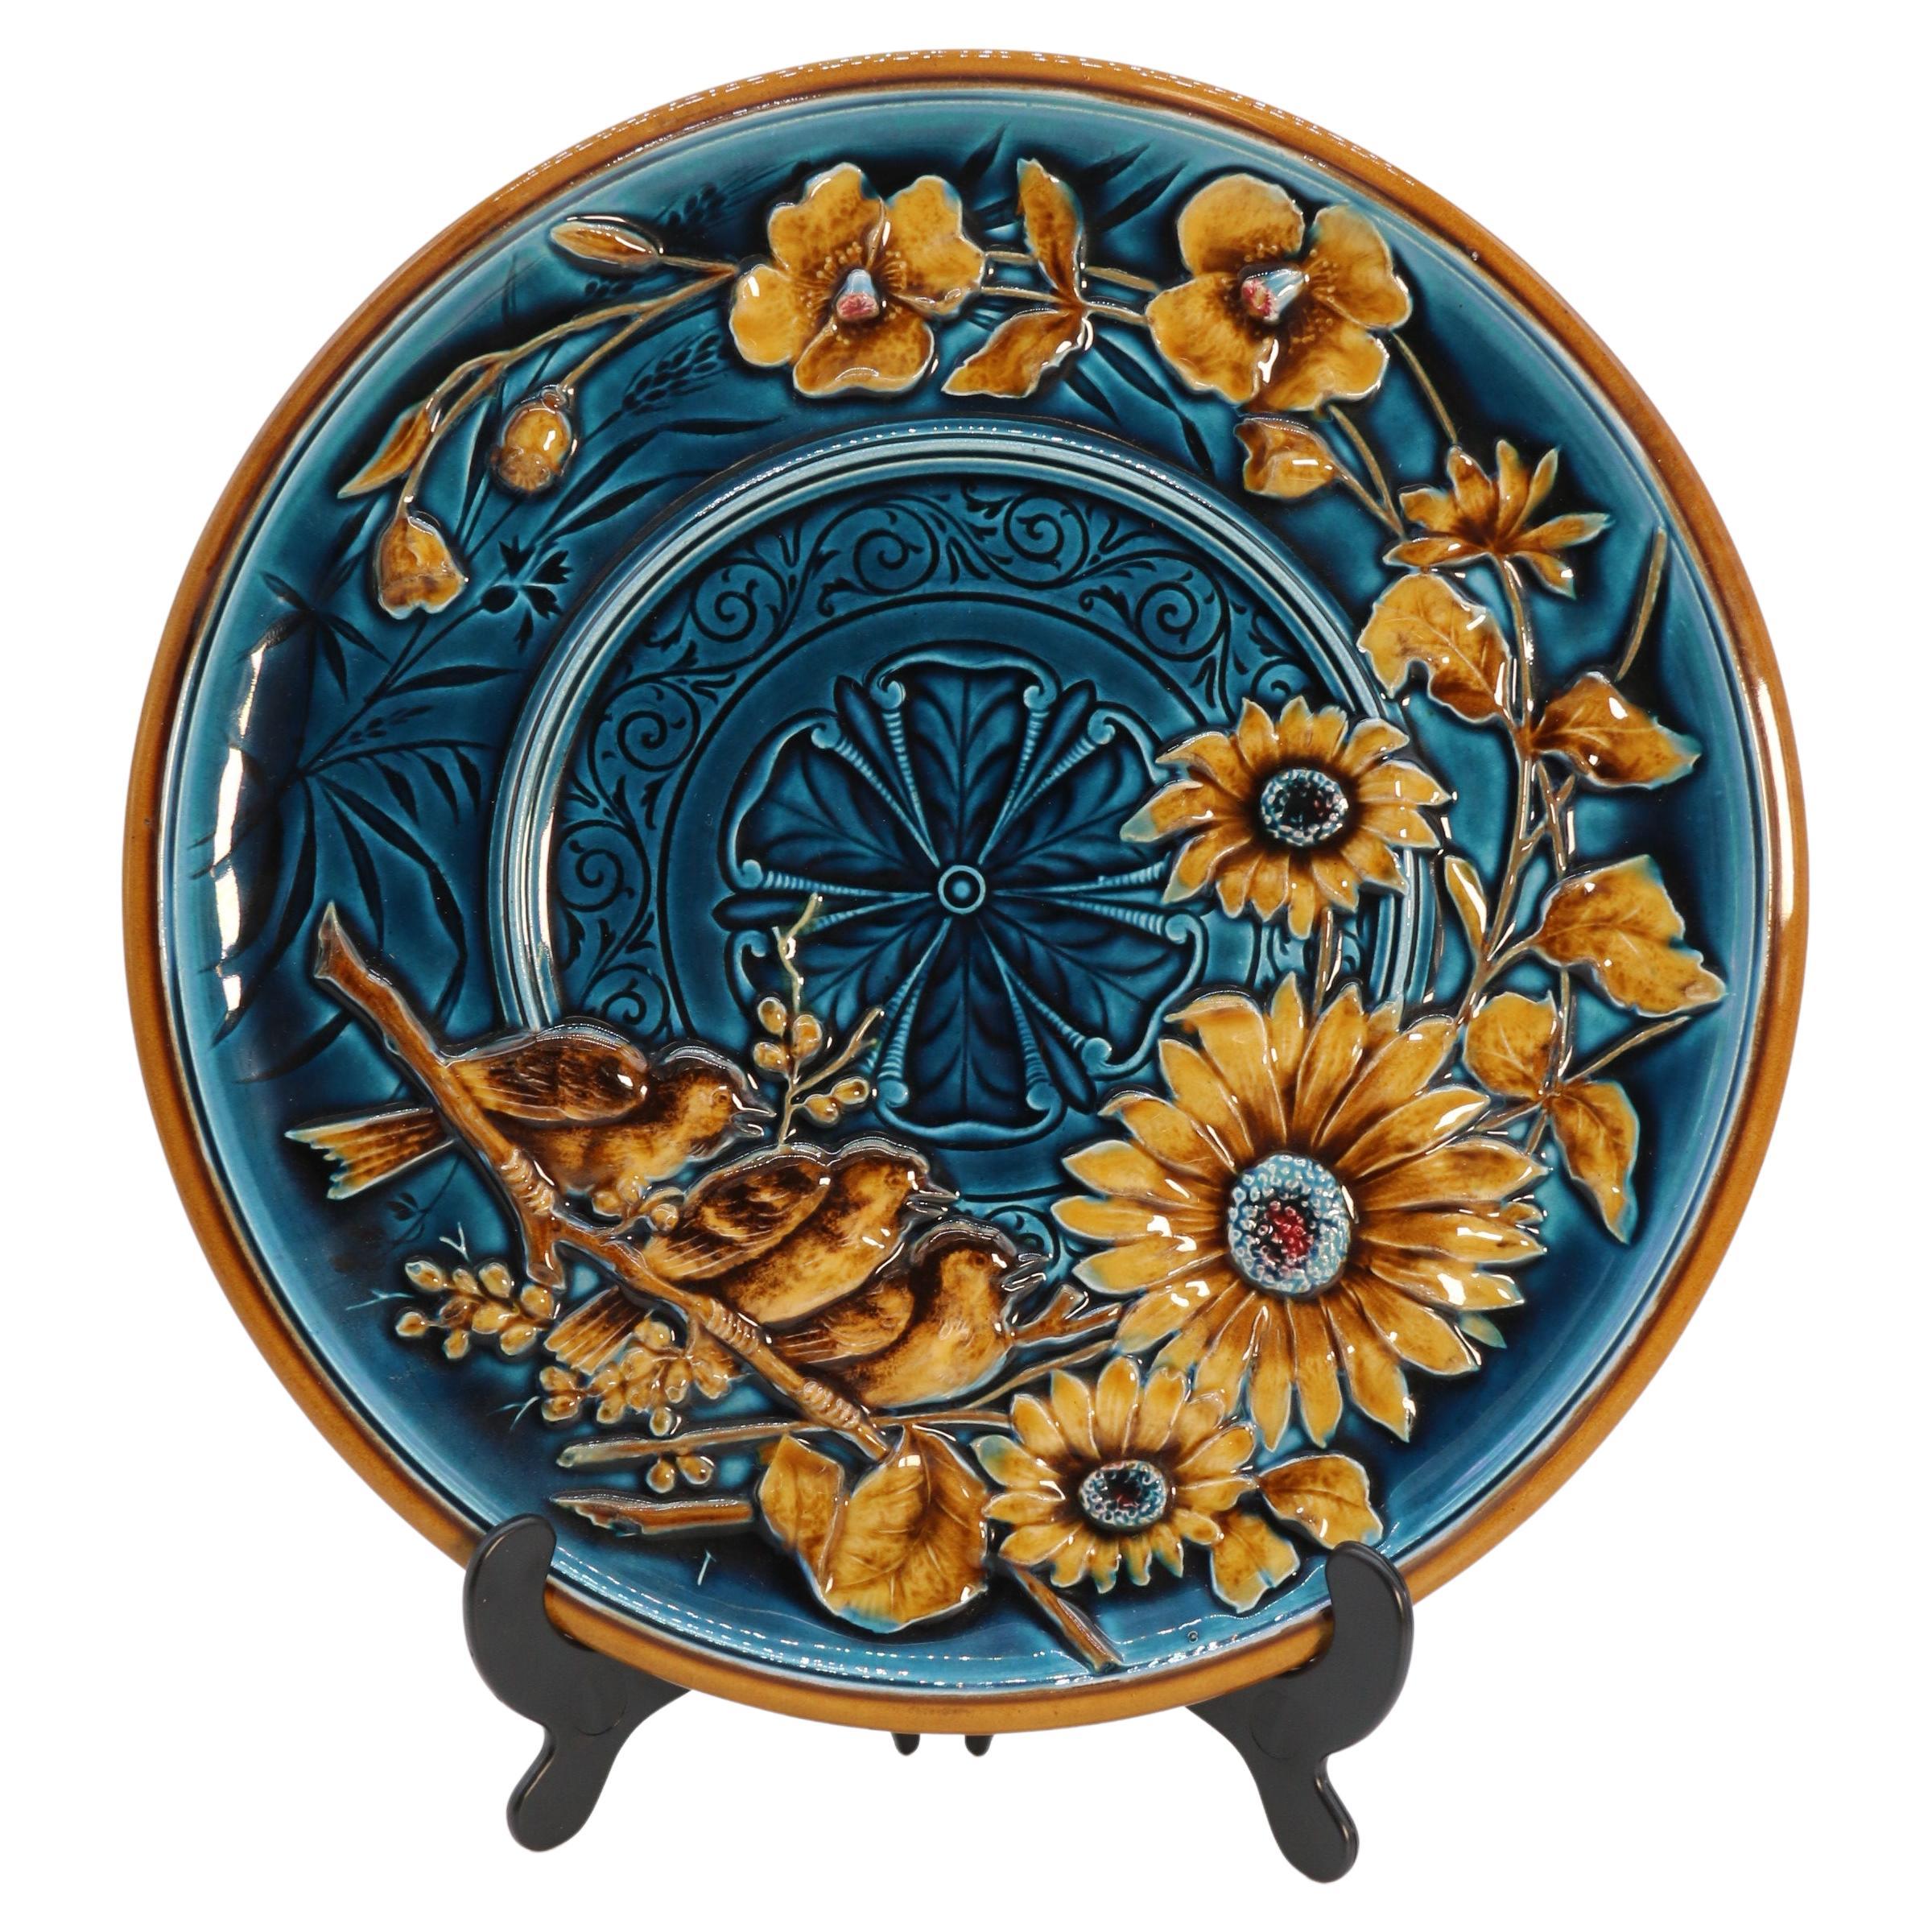 A 19th century Austrian majolica charger from the Gebruder Schutz factory C 1890